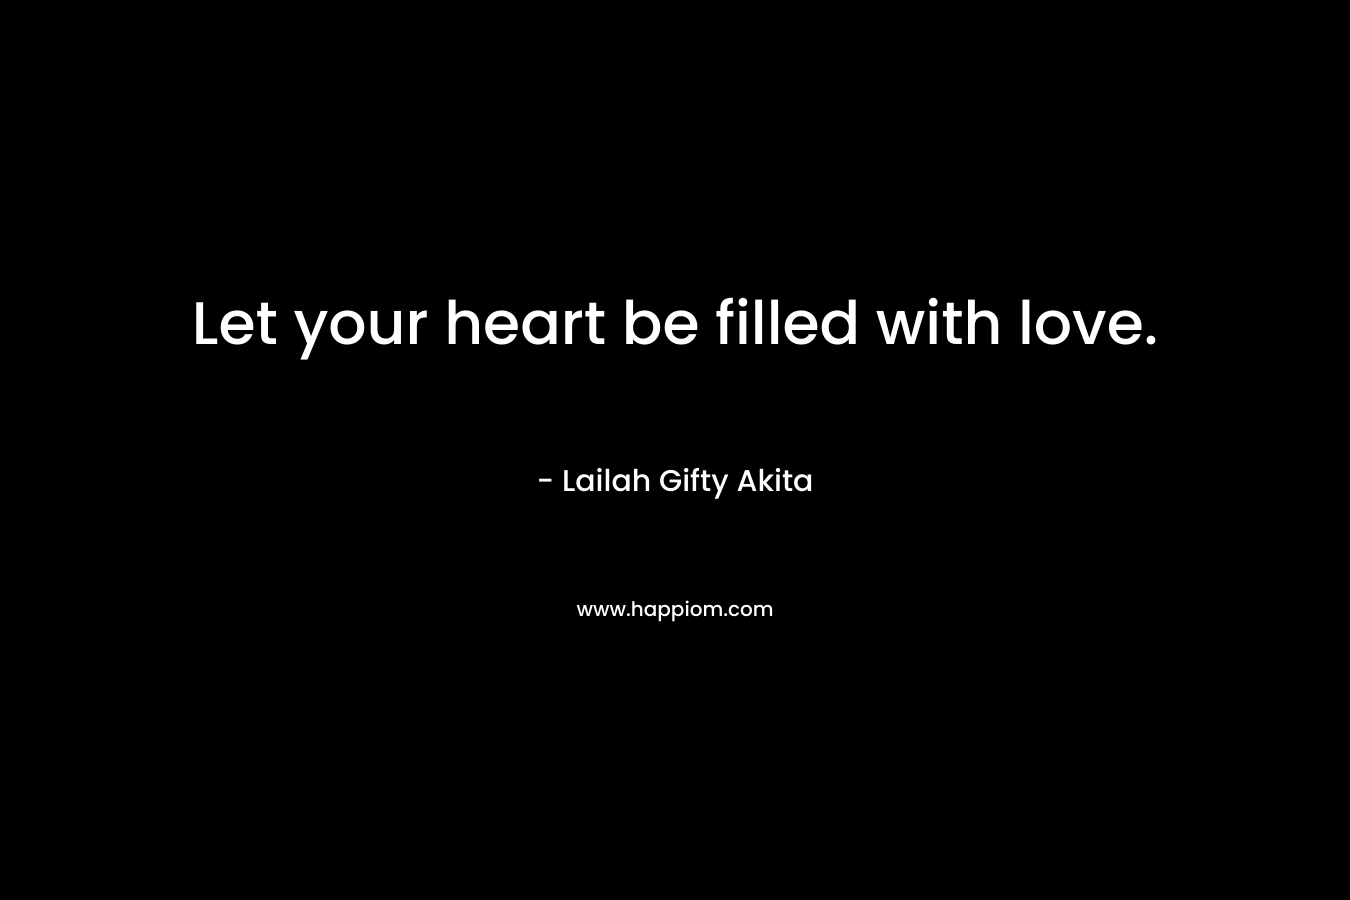 Let your heart be filled with love.